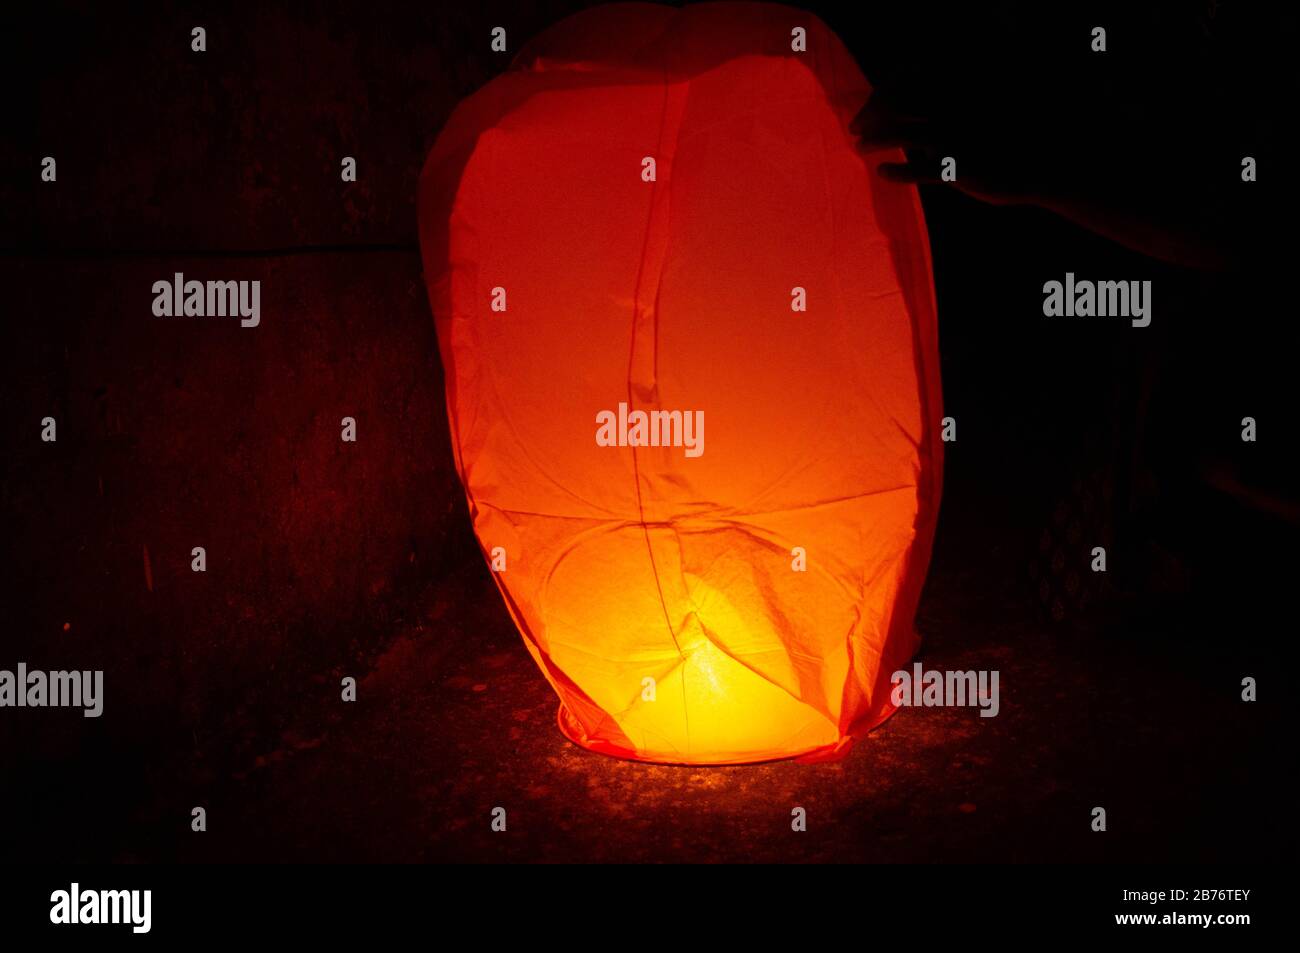 Jaipur India, Circa 2020 - Photograph of a Red Sky lantern with the flames showing clearly on the ground and waiting for it to lift off at night. This Stock Photo